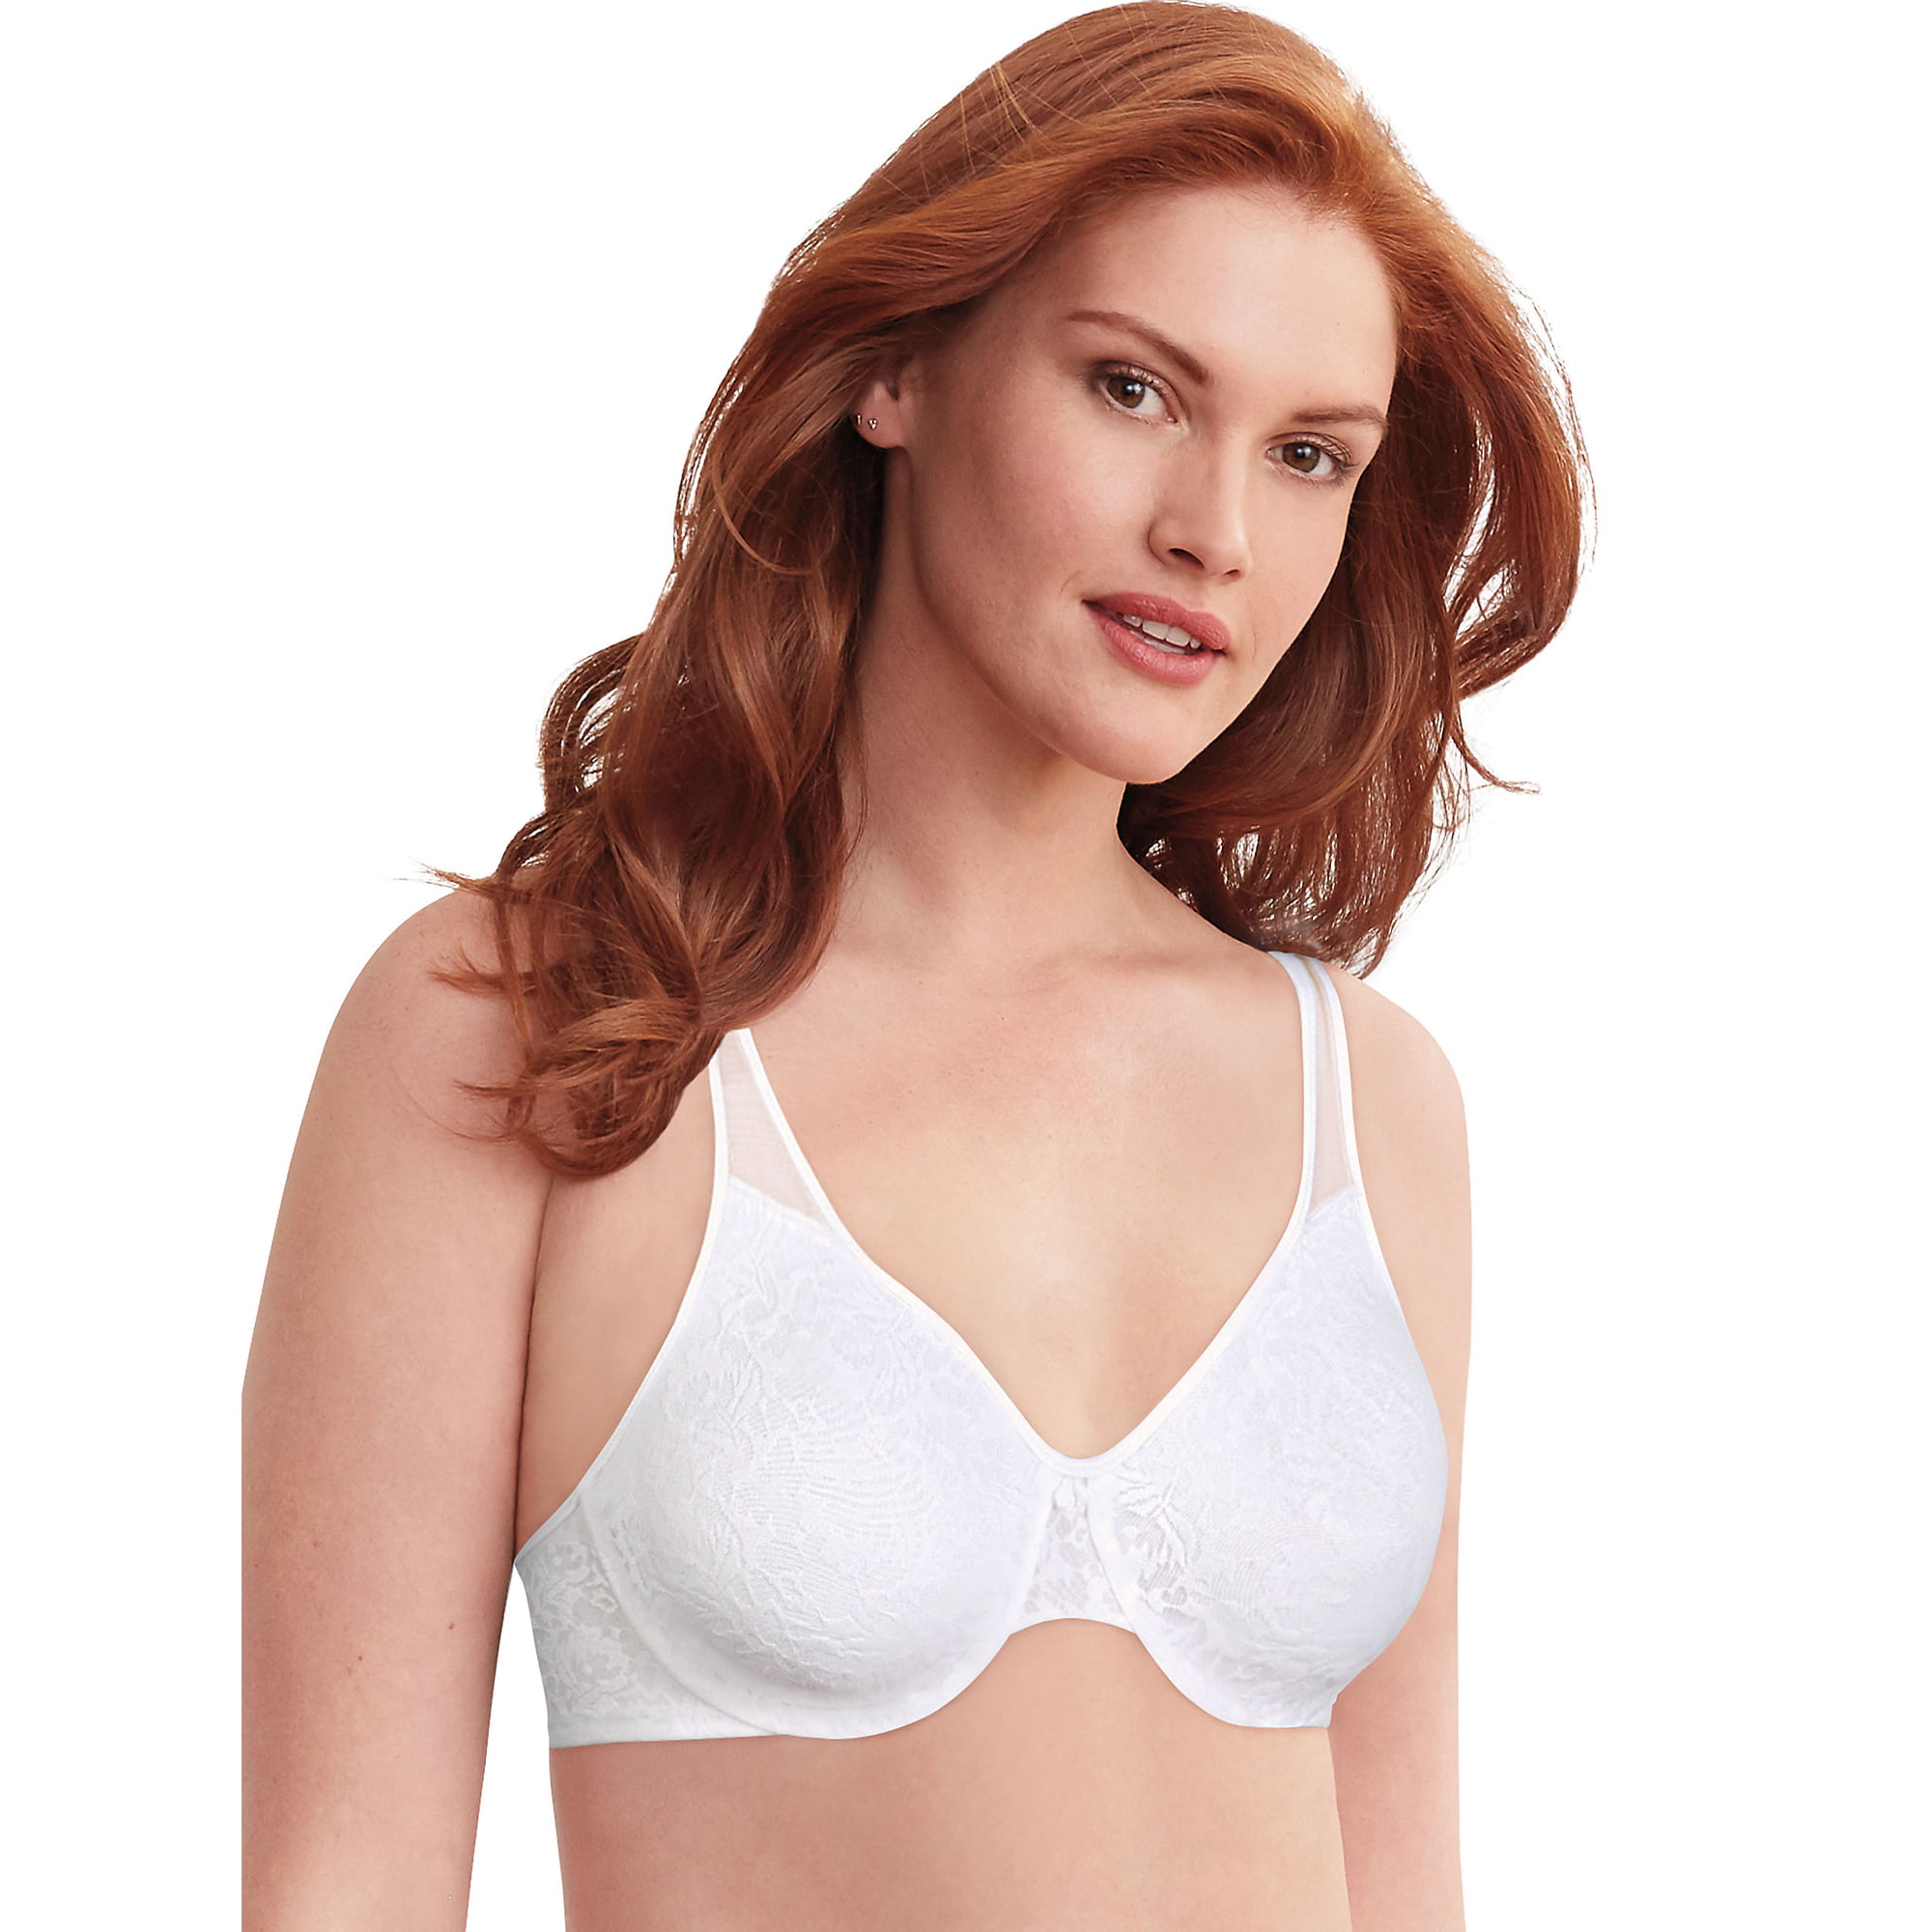 Bali Women's Passion for Comfort Minimizer Bra - 3385 38D Toffee